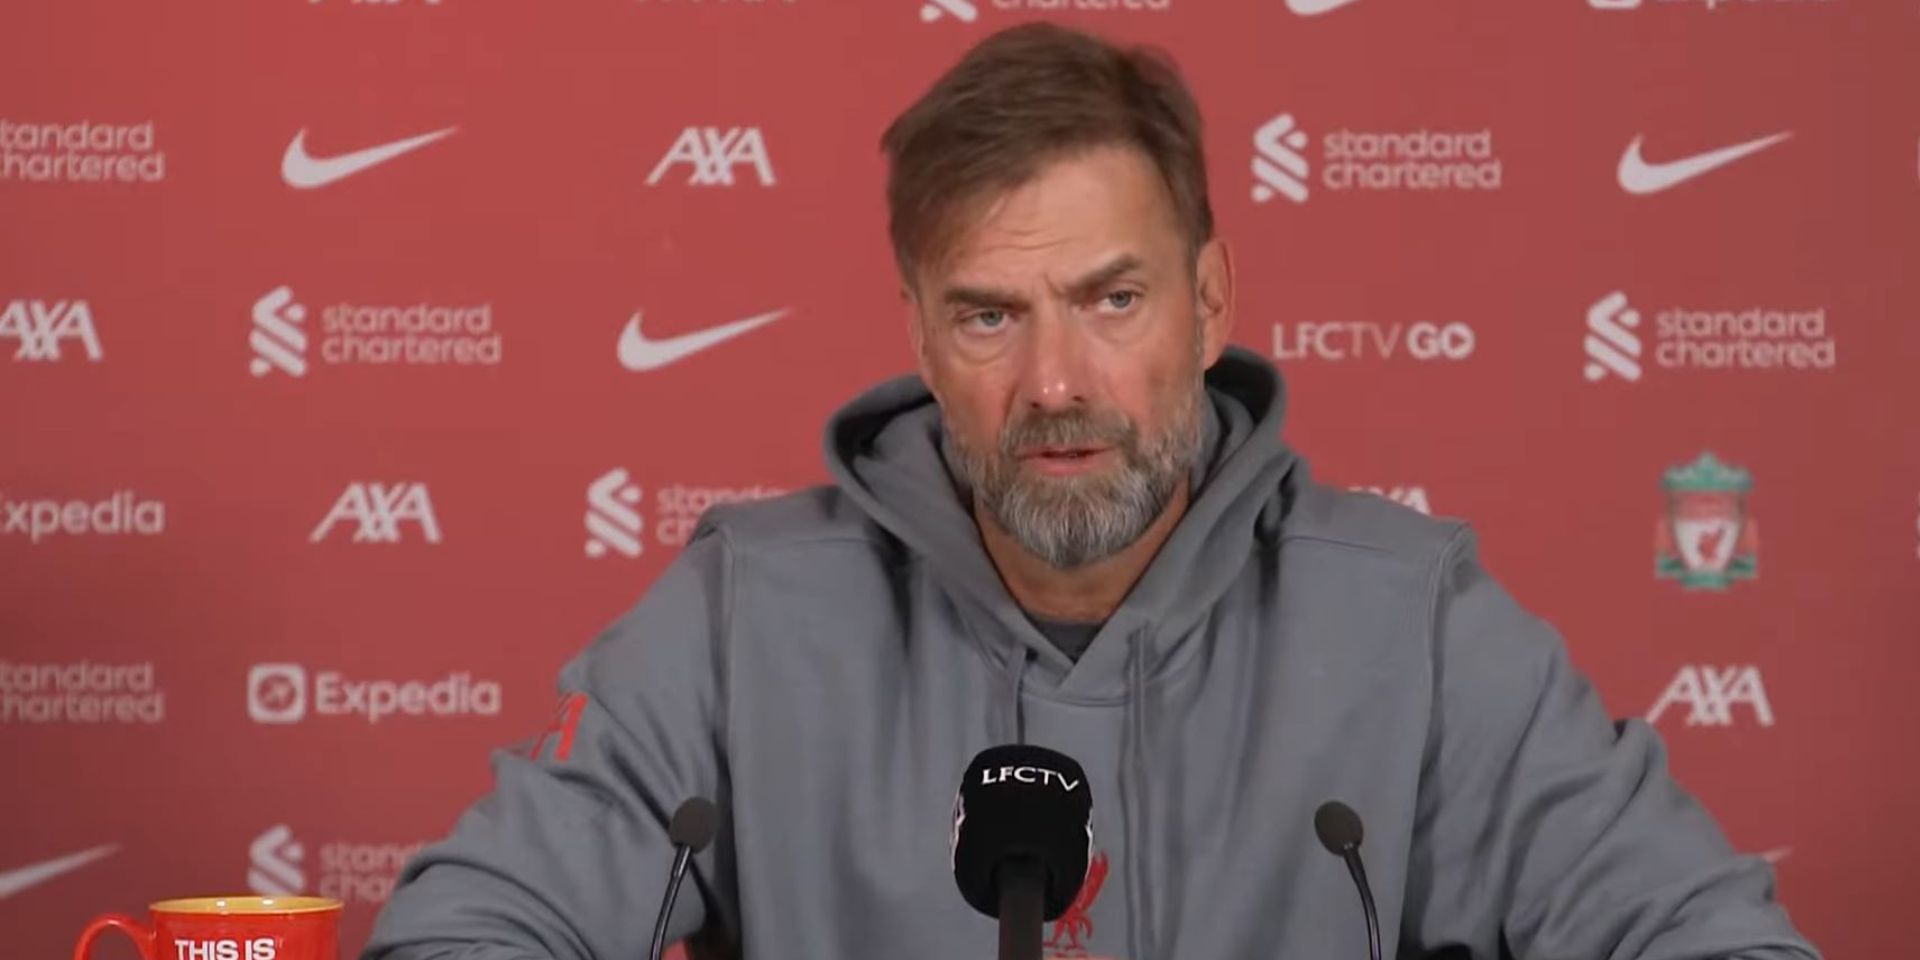 (Video) Klopp on whether he will field a ‘sentimental’ Liverpool team for inconsequential season end